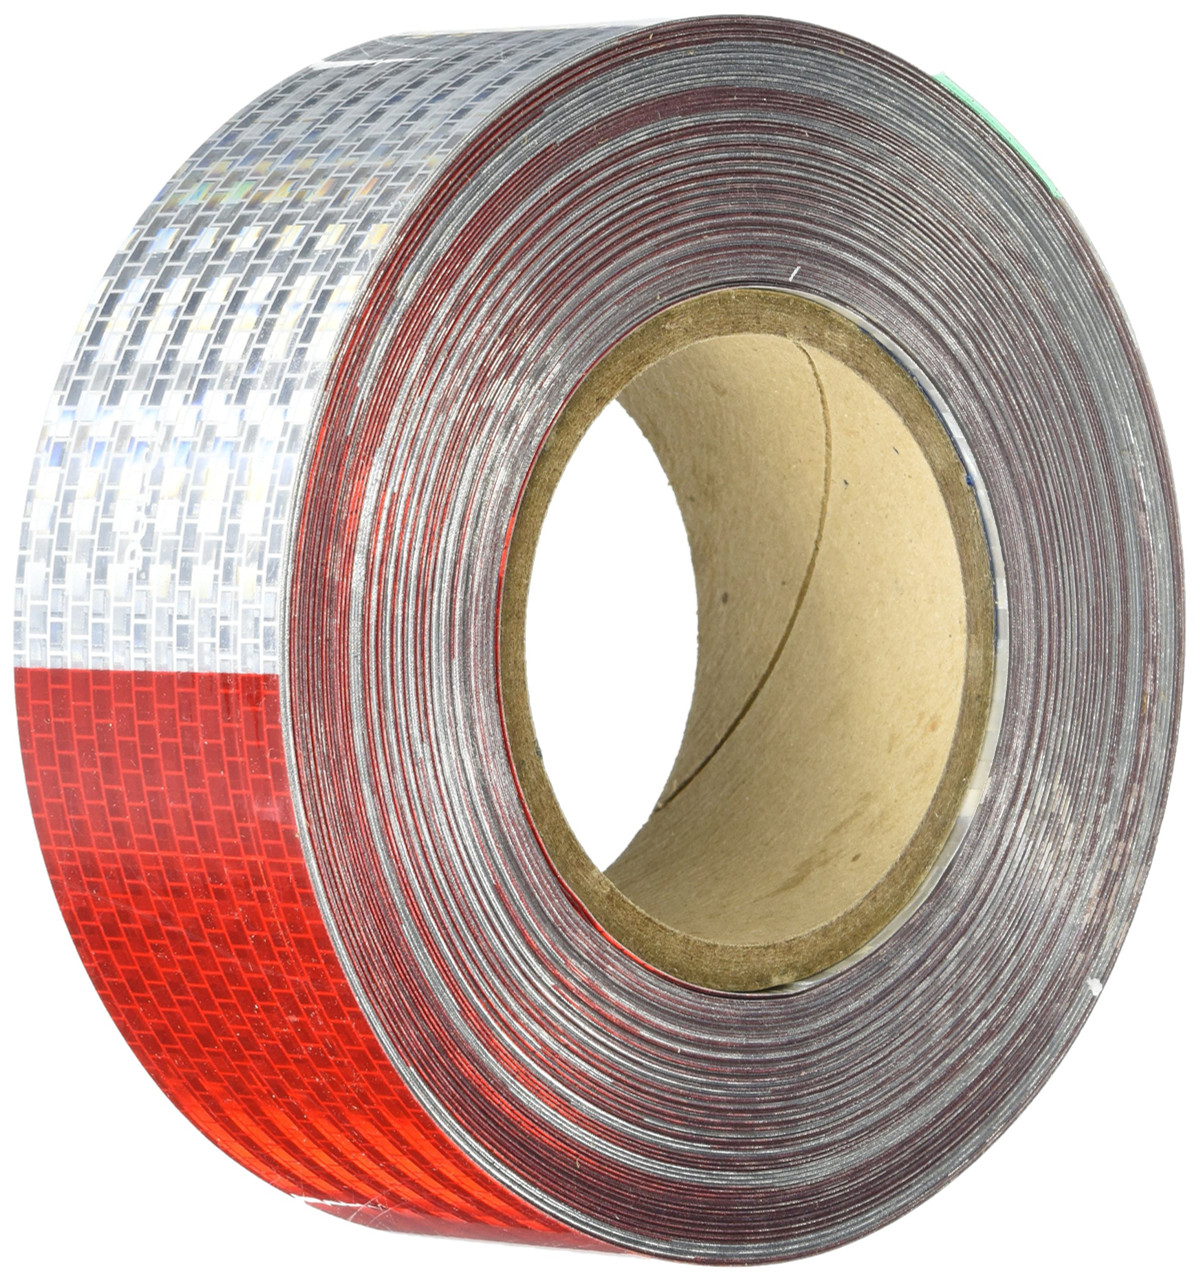 Conspicuity Tape Roll- 150' Long, 2" Wide, Red/White Reflective- Grote 41160